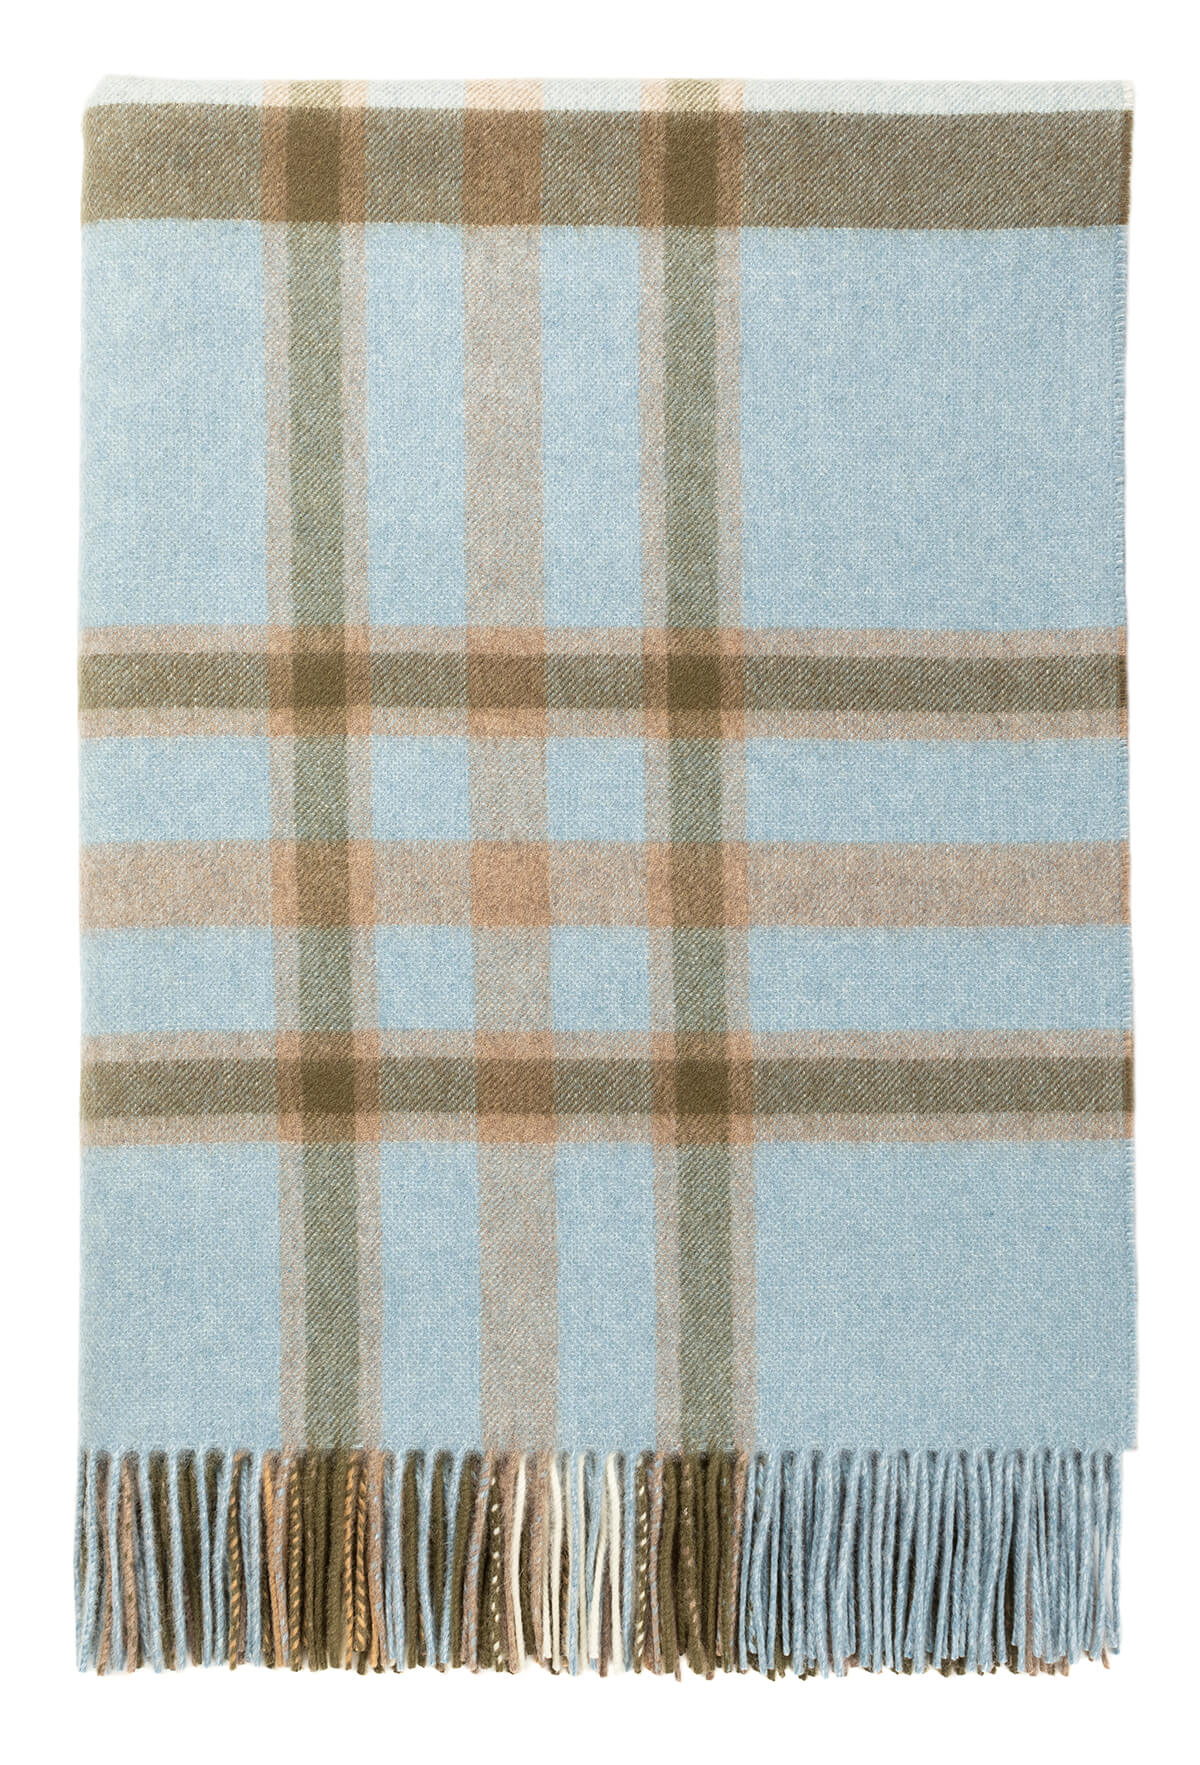 Johnstons of Elgin’s Anderson Modern Check Cashmere Throw on white background WA000055RU7270ONE